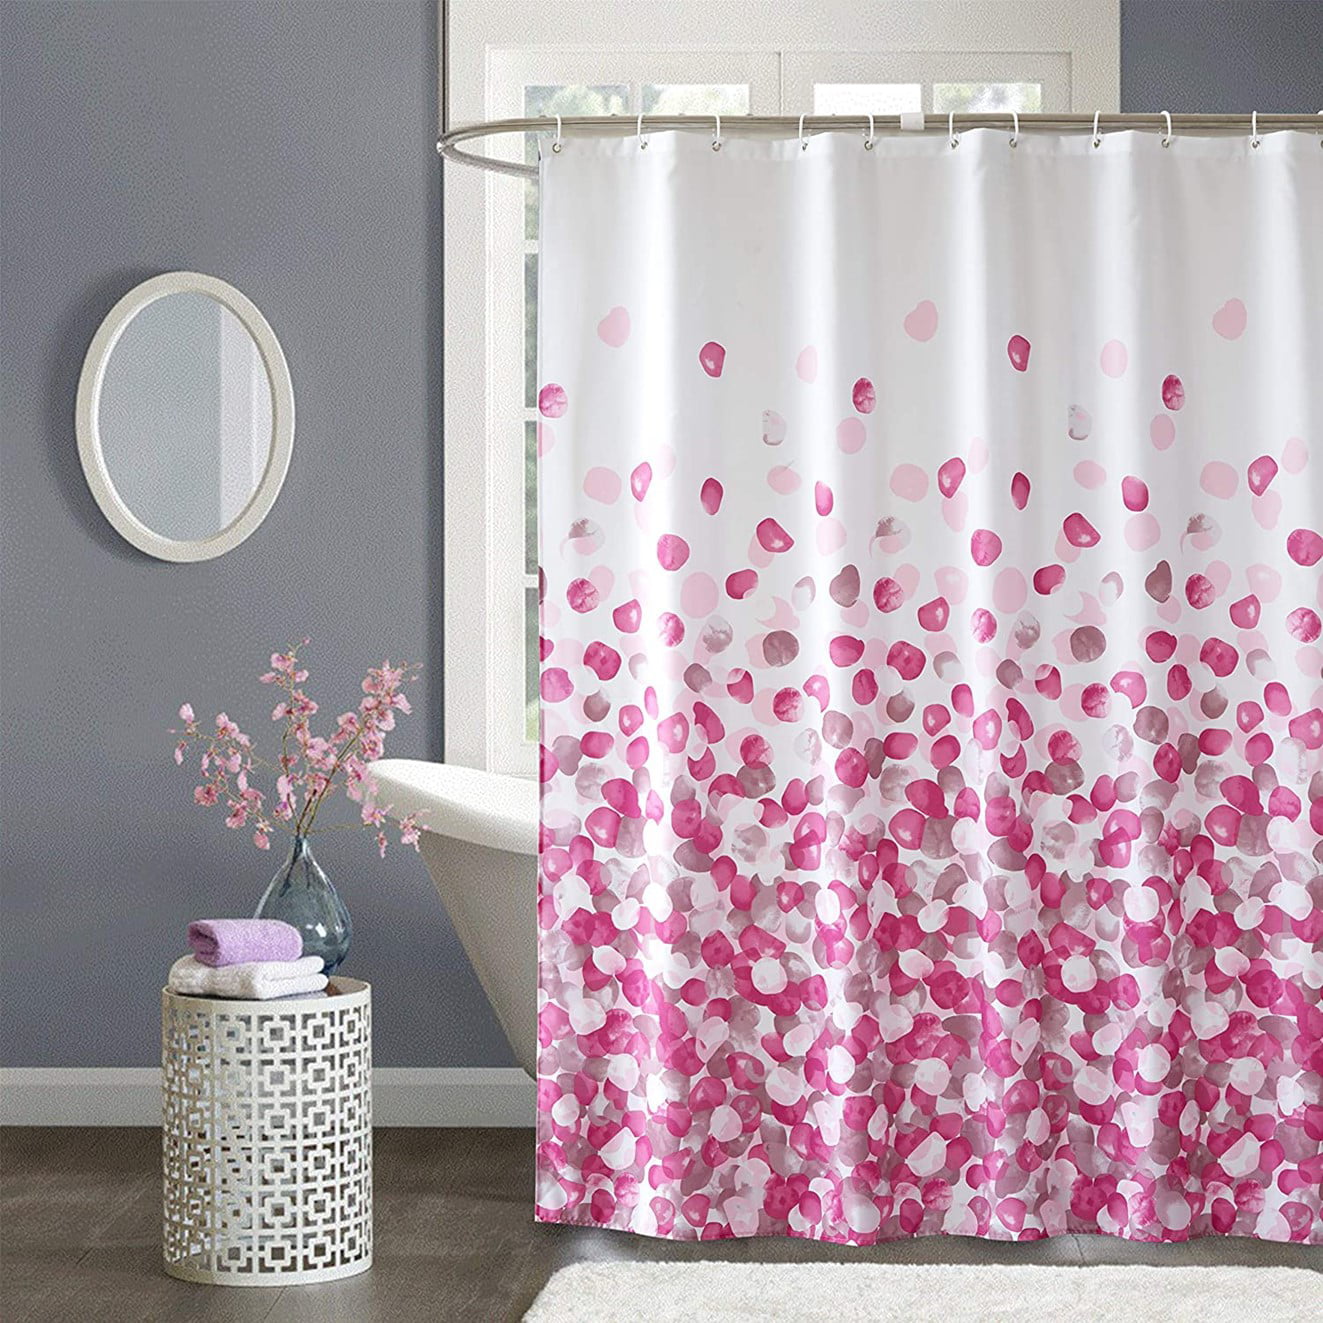 Details about   Nature Shower Curtain Fresh Dew with Butterfly Flowers Bath Curtains 71X71 Inch 